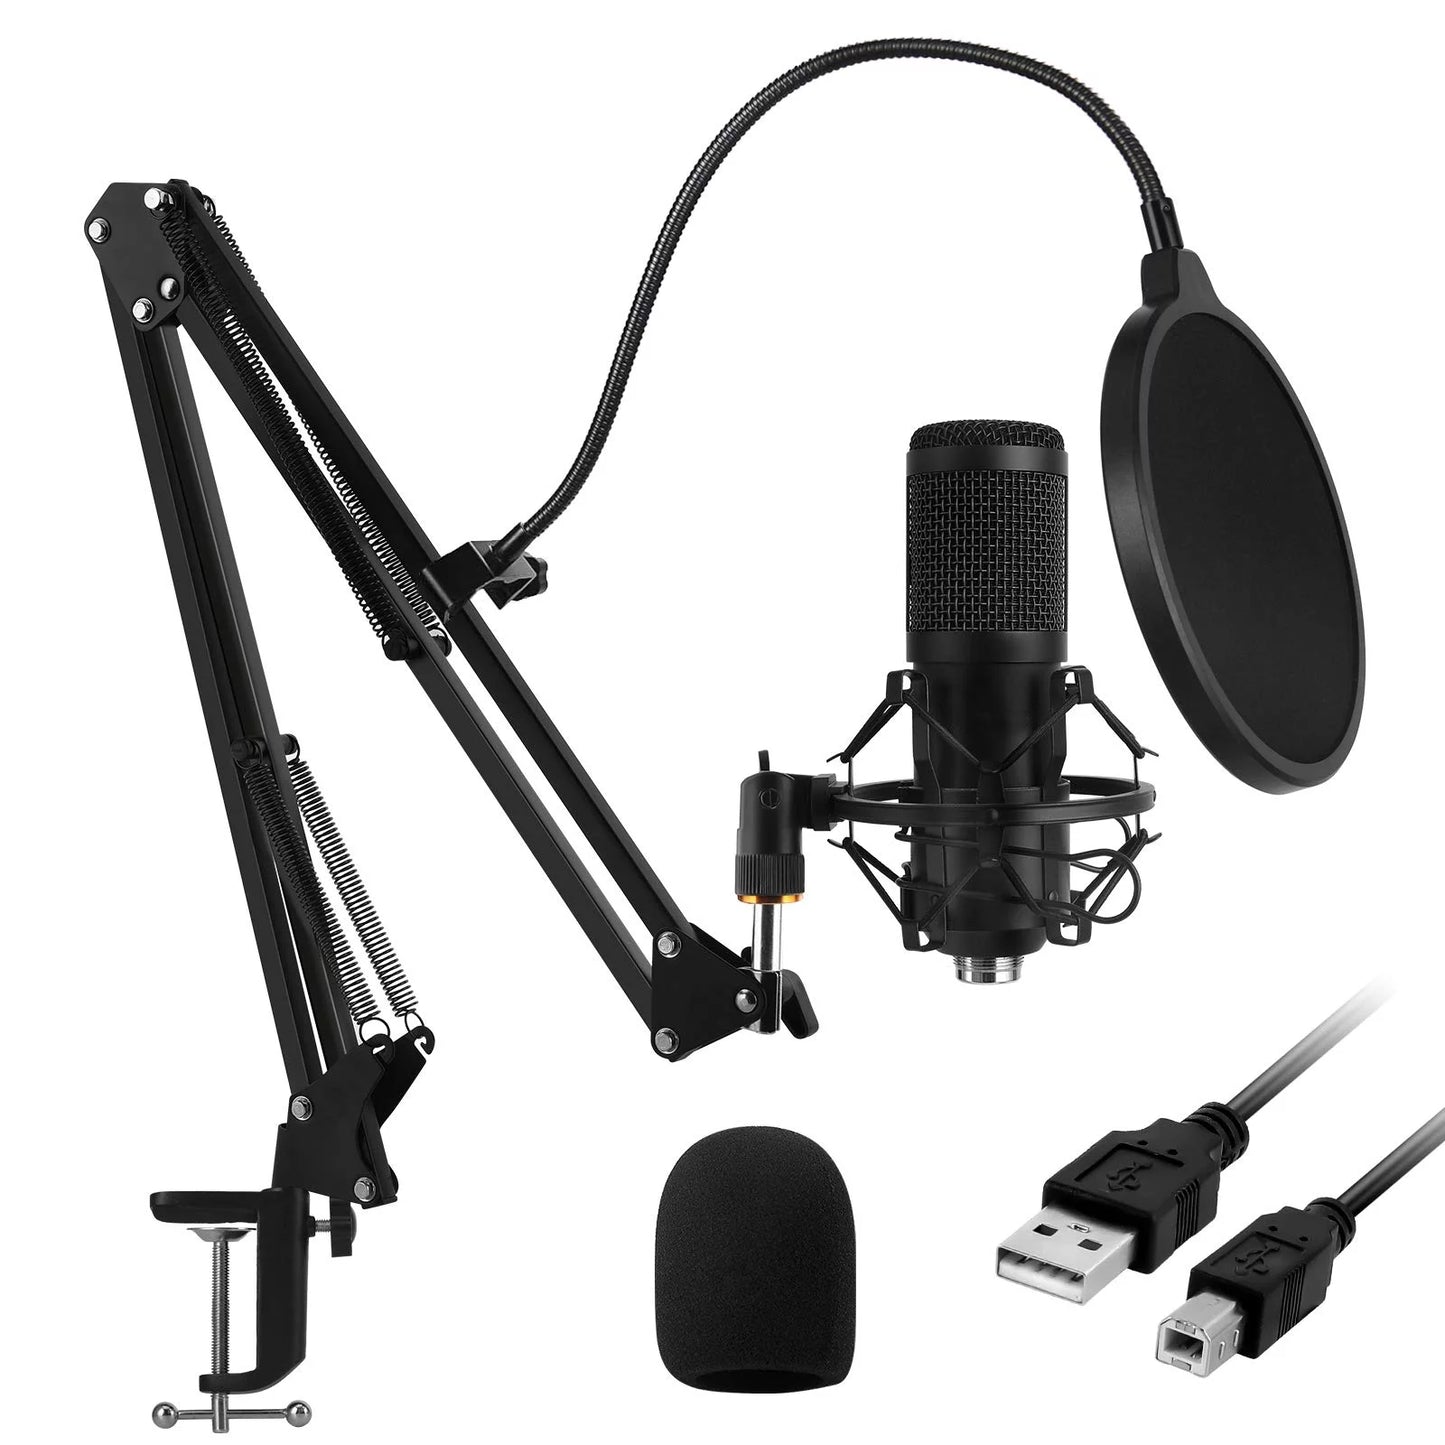 USB Microphone, 48KHZ/24Bit Plug & Play PC Computer Podcast Condenser Cardioid Metal Mic Kit with Professional Sound Chipset for Recording, Gaming, Singing, YouTube